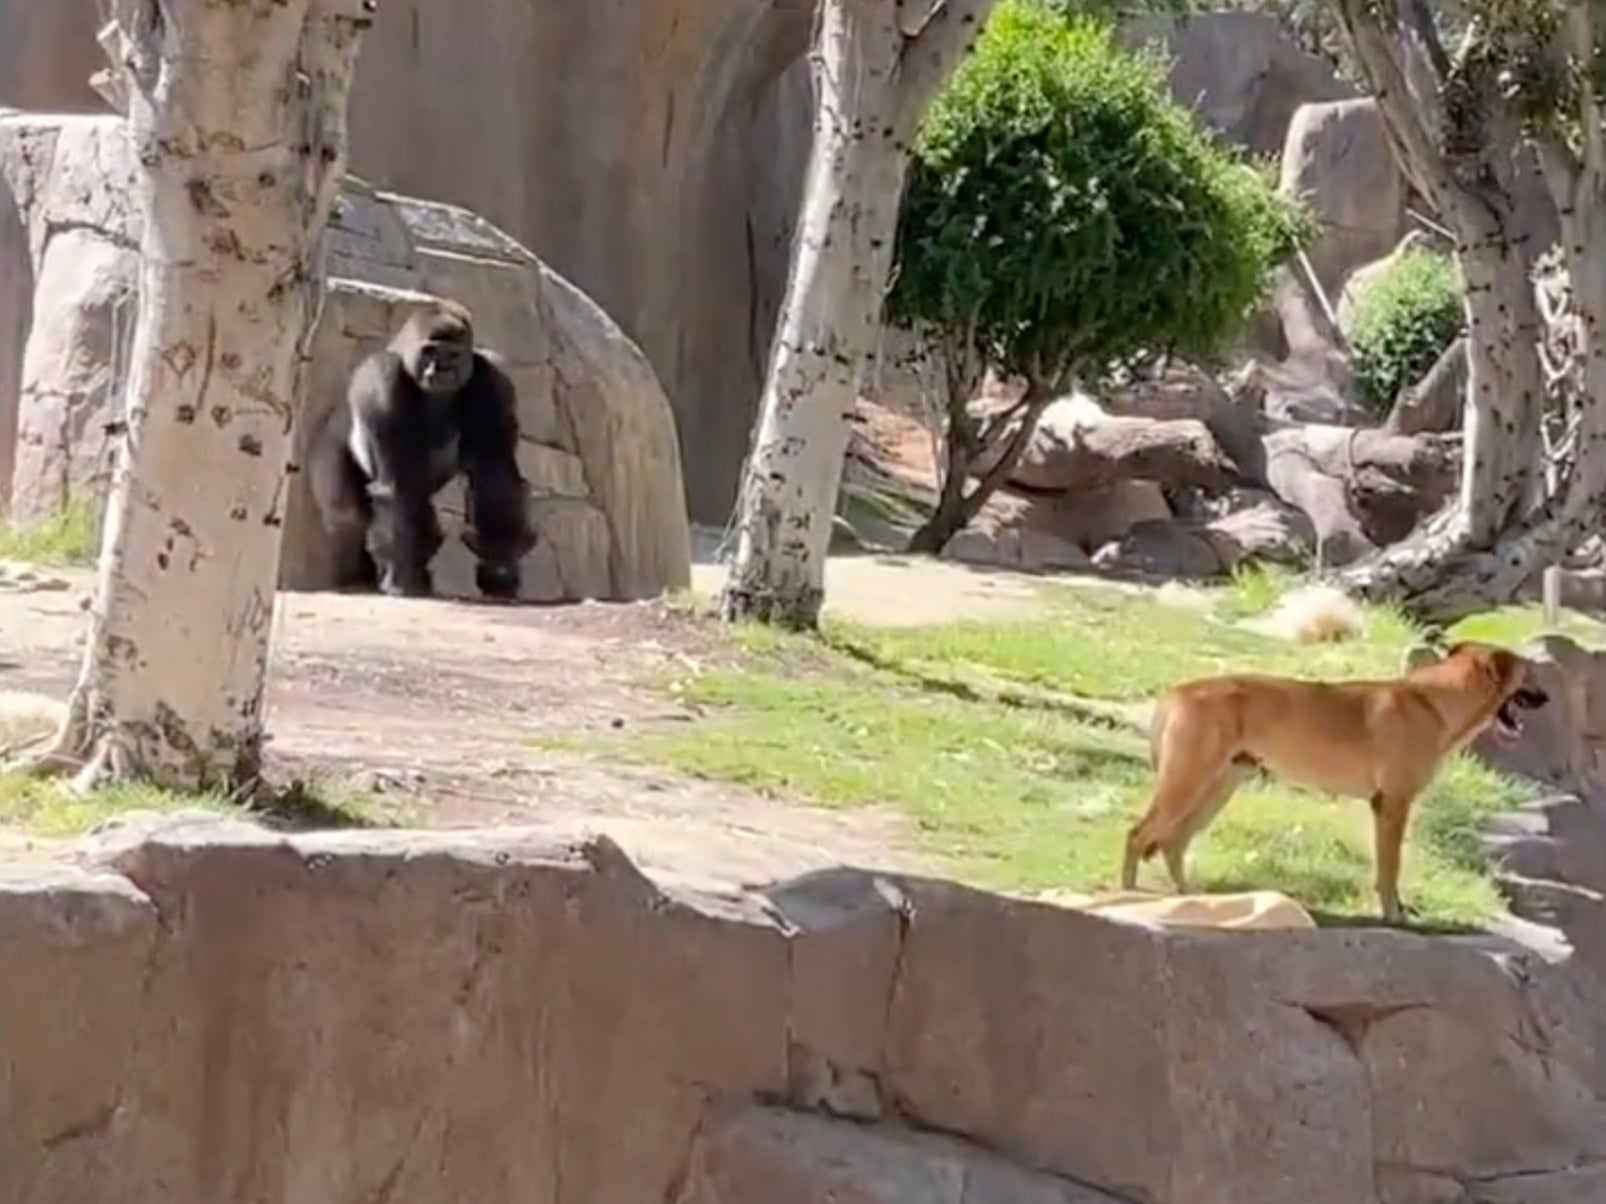 A dog was removed from the gorilla enclosure at San Diego Zoo Safari Park